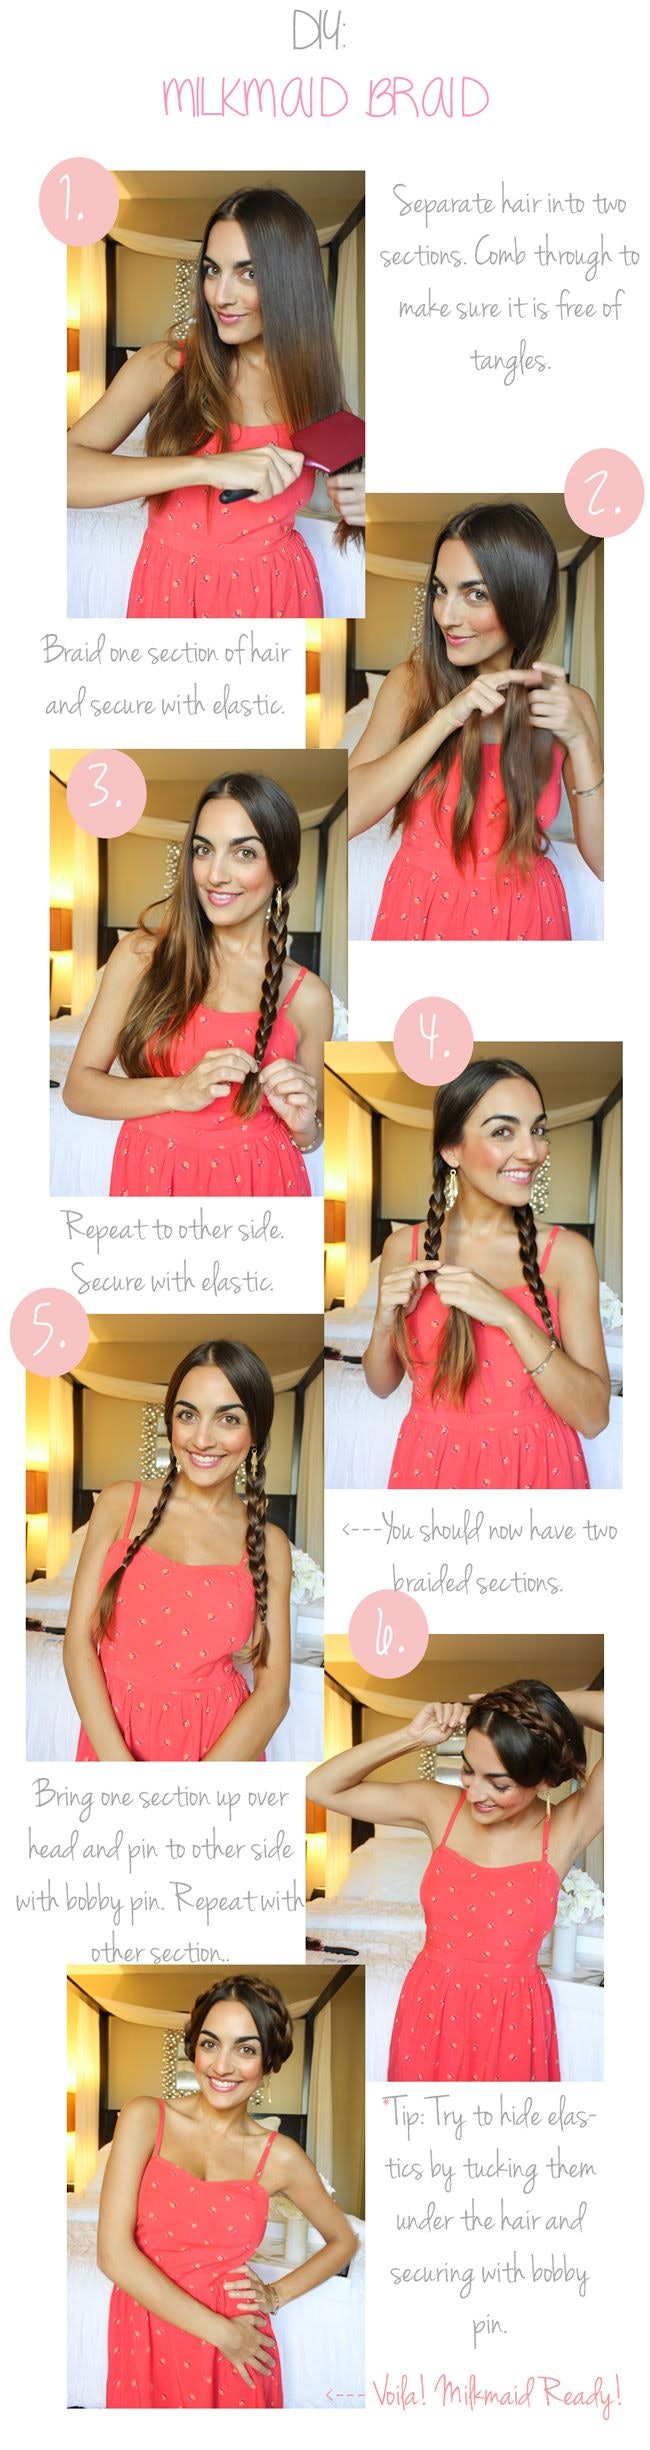 8 Cool Braid Tutorials From Pinterest That Will Actually Teach You How To Plait